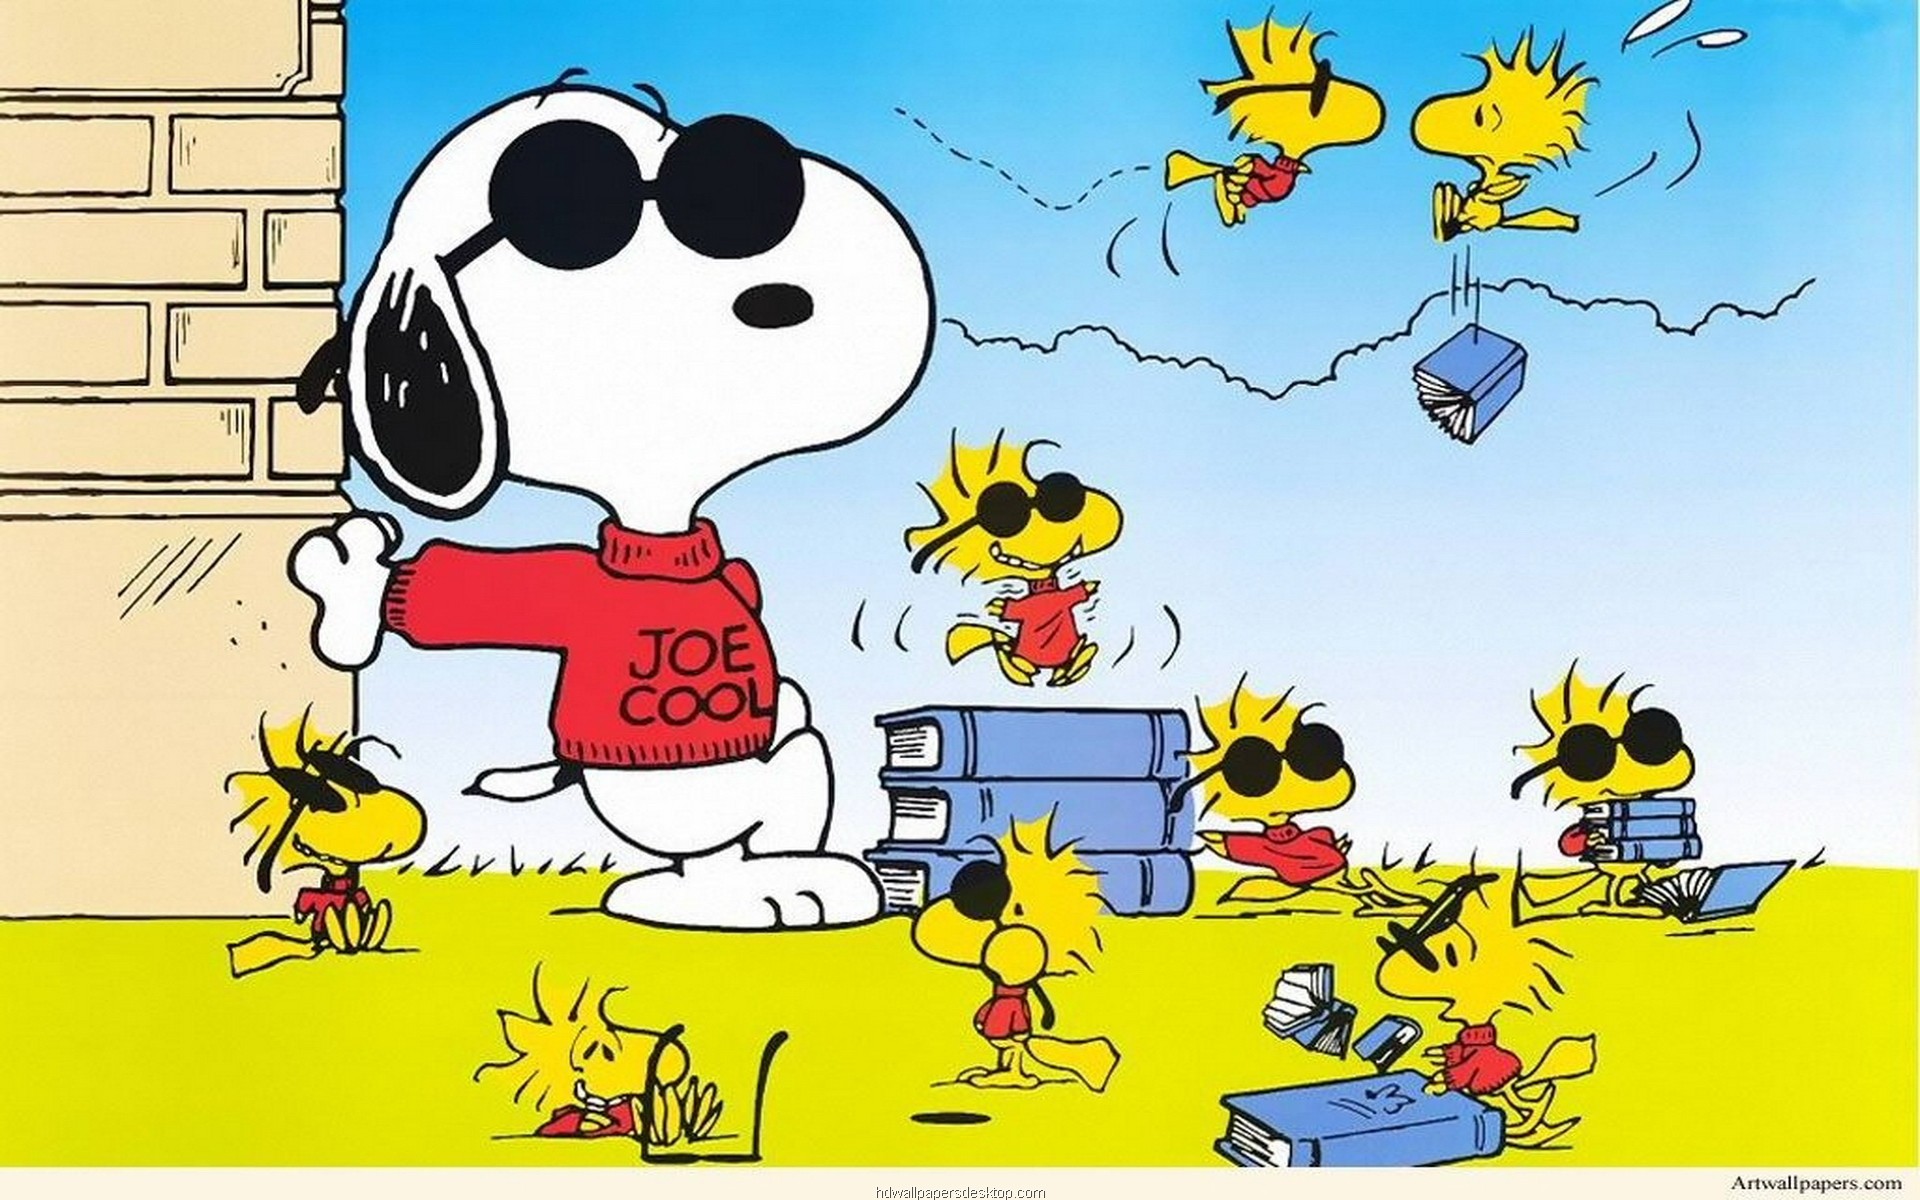 Snoopy Easter